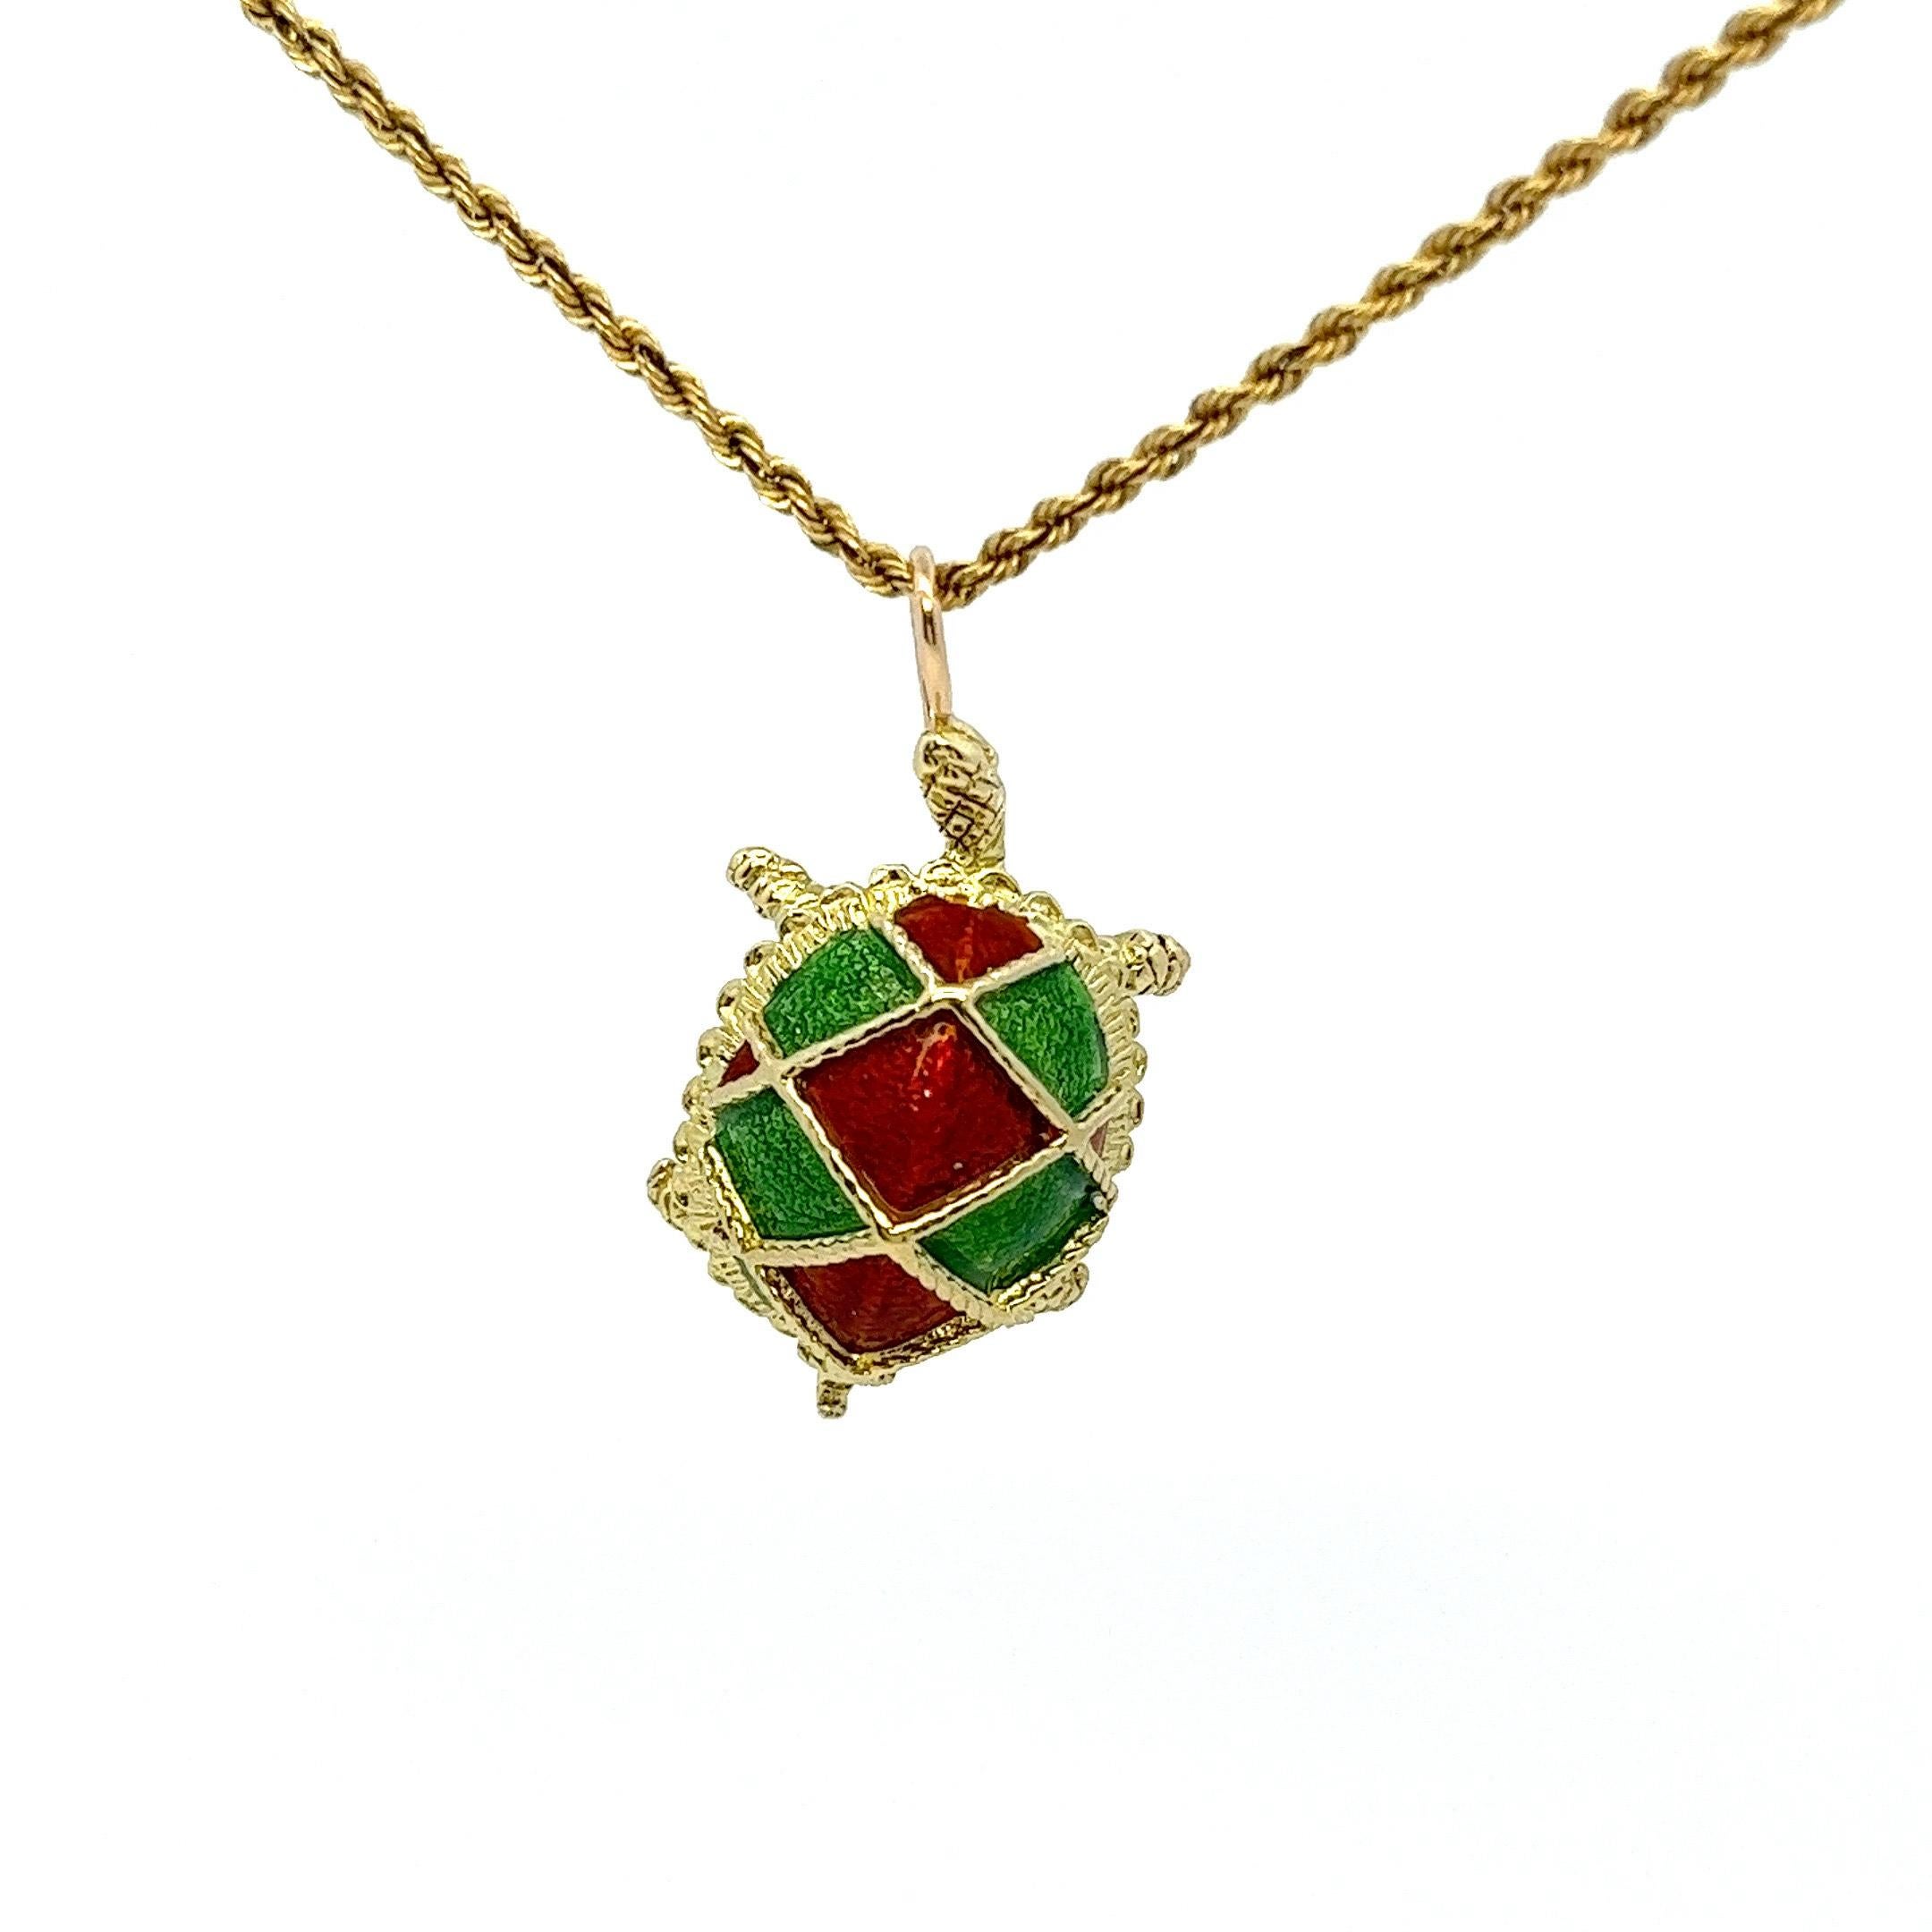 This Cartier pendant, dating back to the 1940s, is a notable representation of the brand's craftsmanship. Made of 18 karat yellow gold, it depicts a green and red enameled shell turtle. The turtle's body is distinct and intricate, with carved